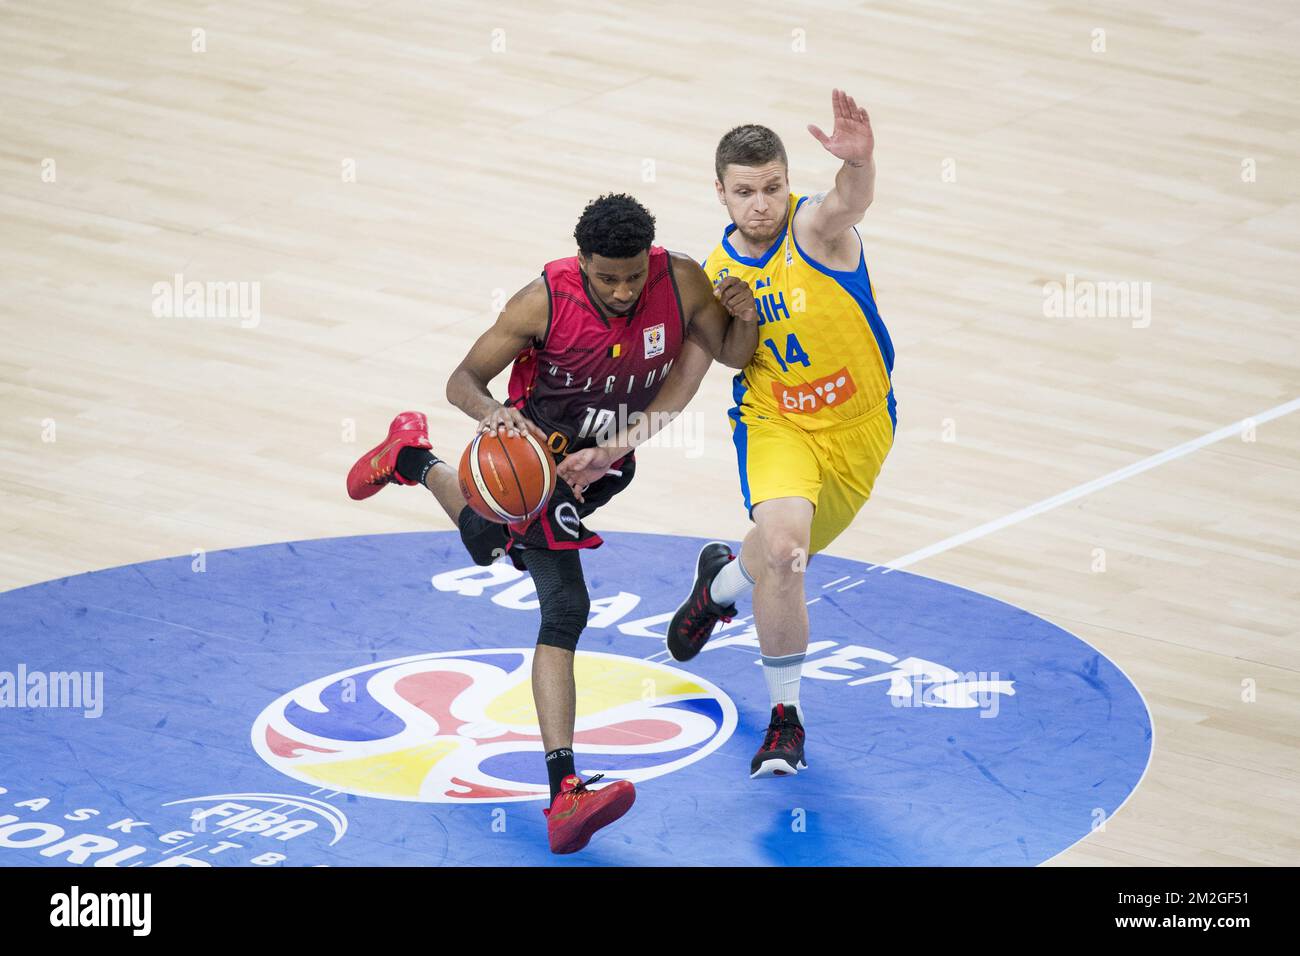 Belgium's Loic Schwartz and Bosnia's Almir Hasandic fight for the ball during basketball game between Belgium's Belgian Lions and Bosnia & Herzegovina, the sixth and last qualification game for world cup 2019 in the group E, Monday 02 July 2018 in Merksem, Antwerp. BELGA PHOTO JASPER JACOBS Stock Photo